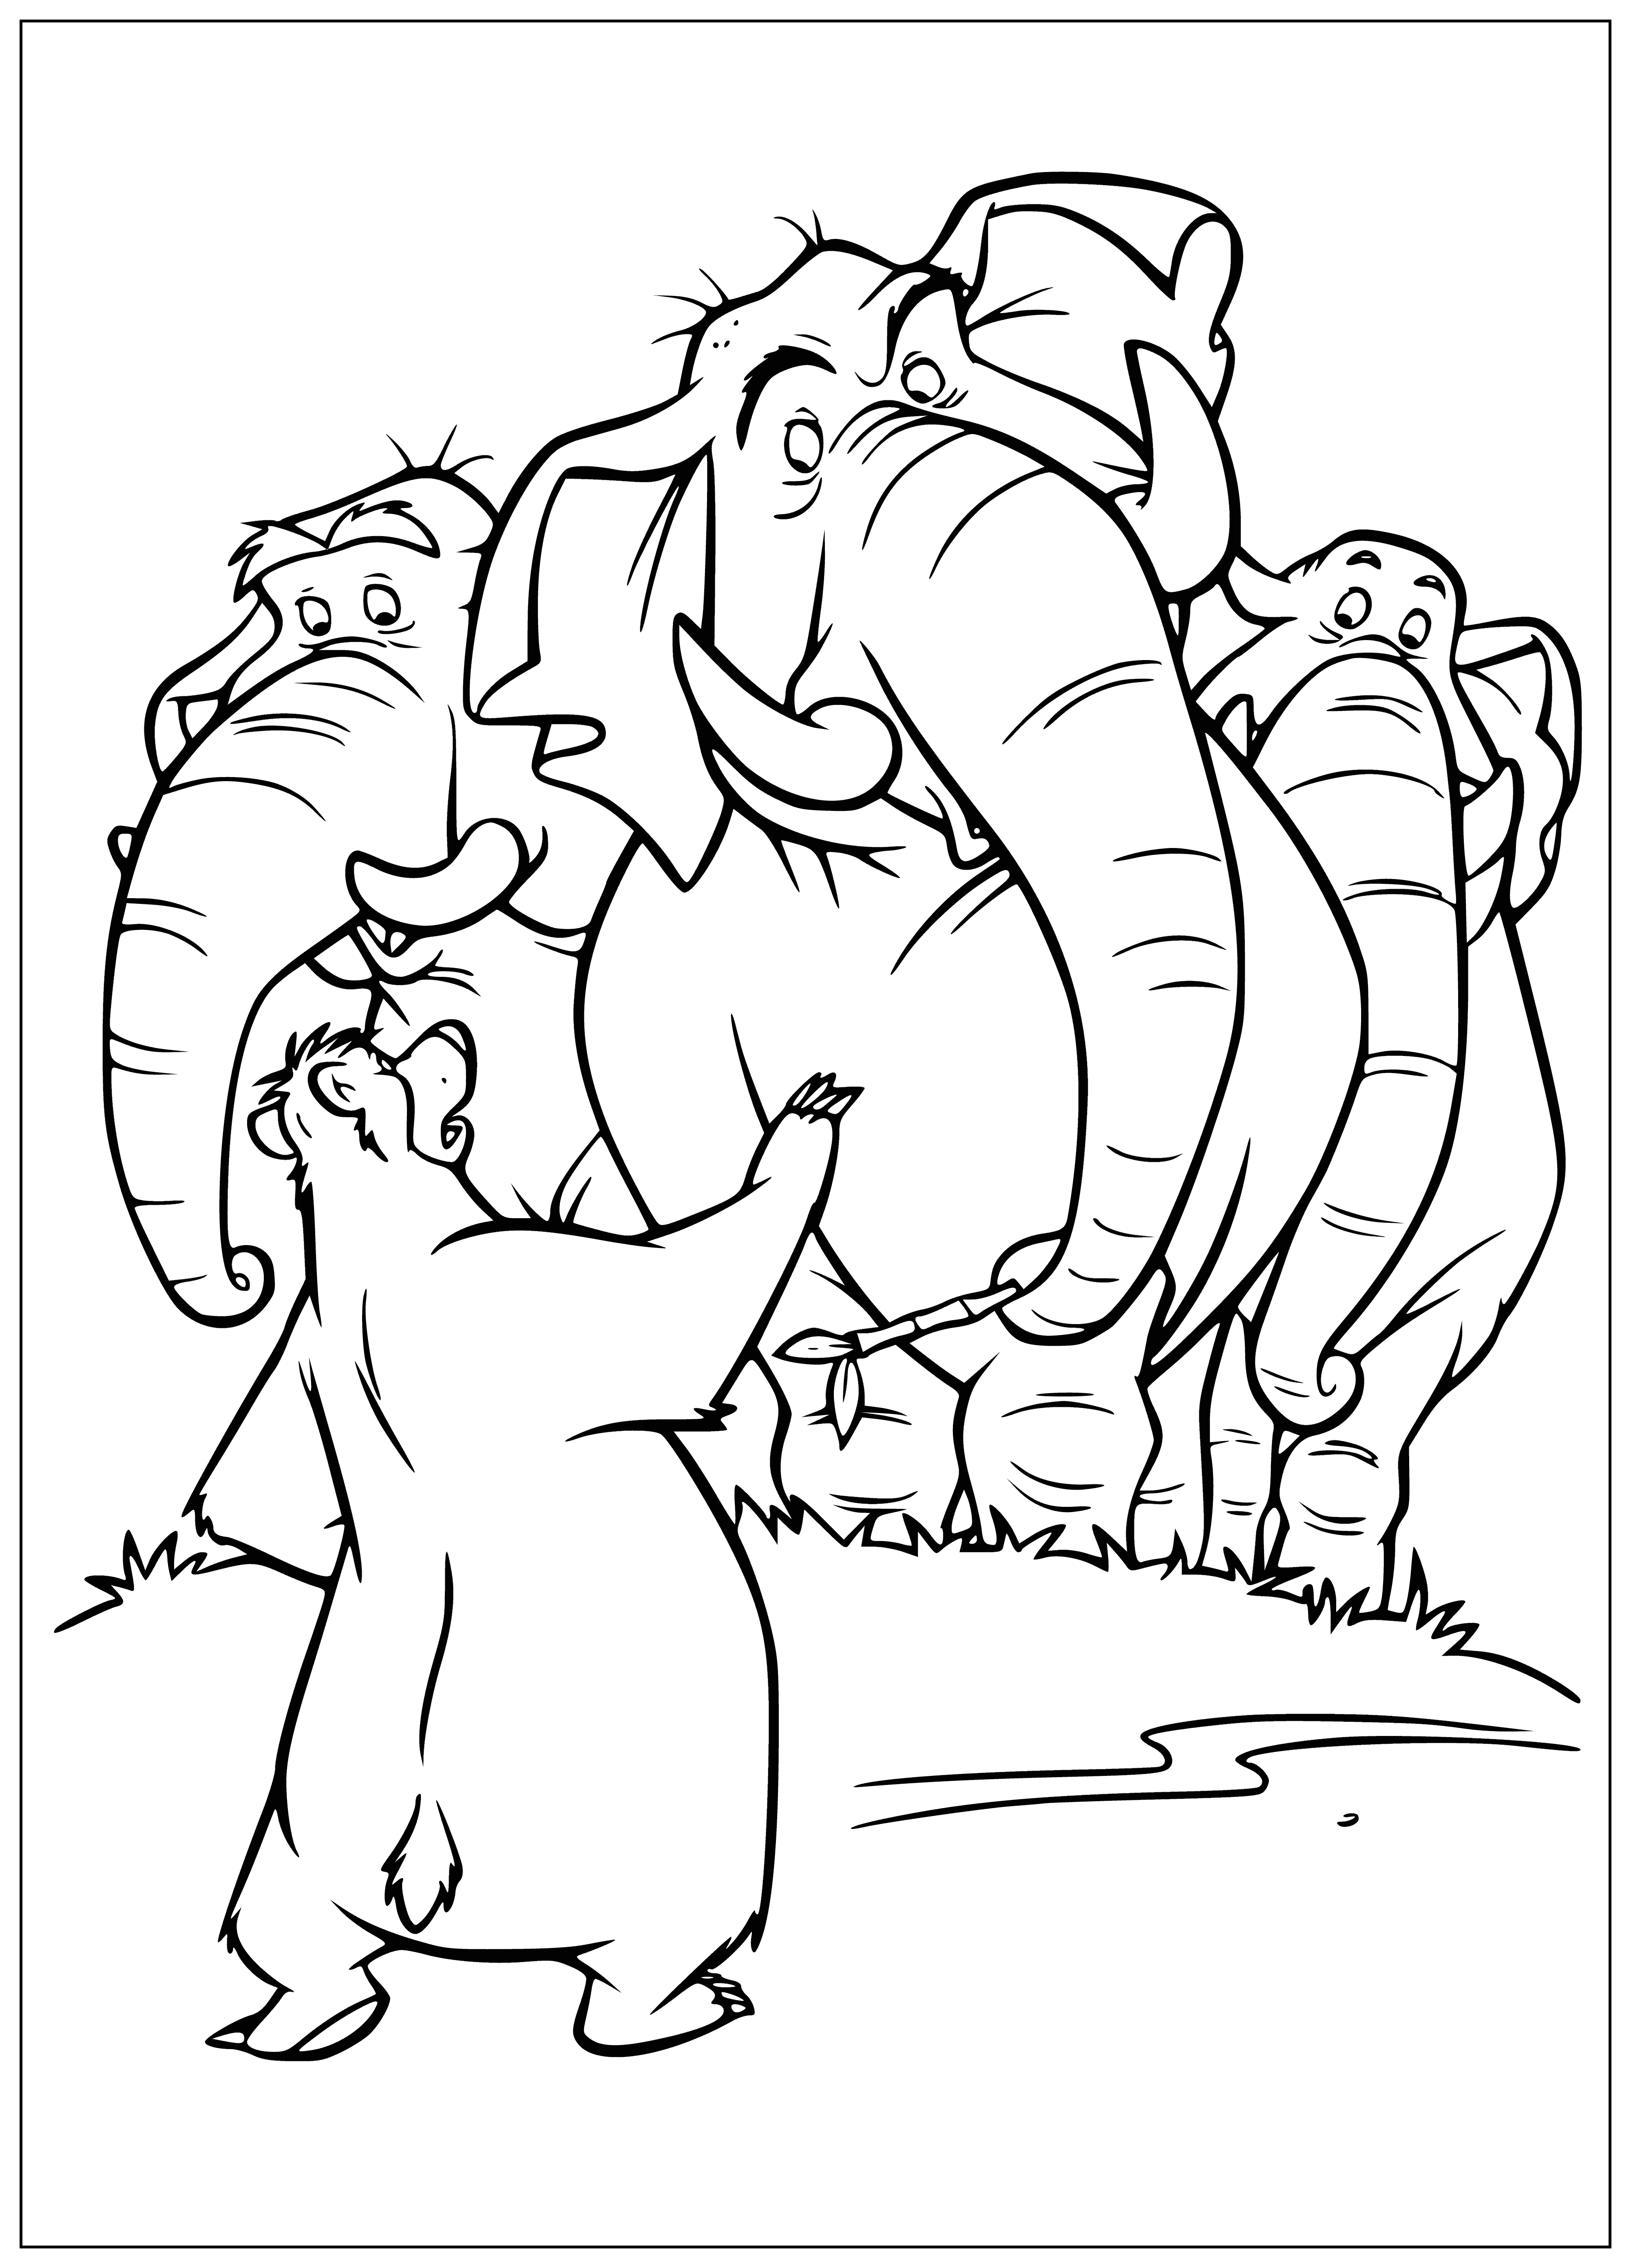 coloring page: Two creatures, an elephant and a bear, stand in a calm jungle scene. Ele. looks kindly, bear reaches w/ paws in playful delight.